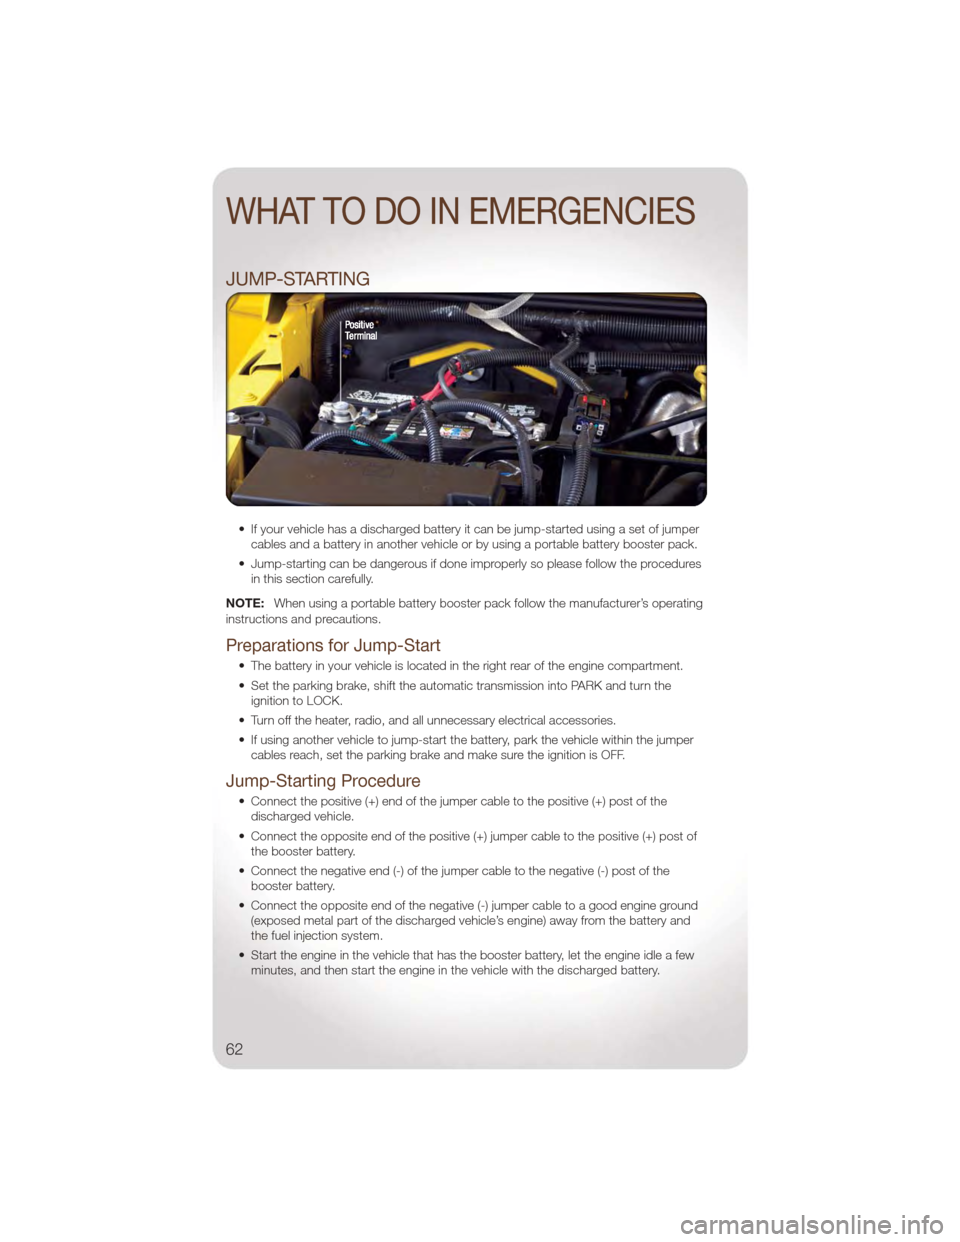 JEEP WRANGLER 2011 JK / 3.G User Guide JUMP-STARTING
• If your vehicle has a discharged battery it can be jump-started using a set of jumpercables and a battery in another vehicle or by using a portable battery booster pack.
• Jump-sta